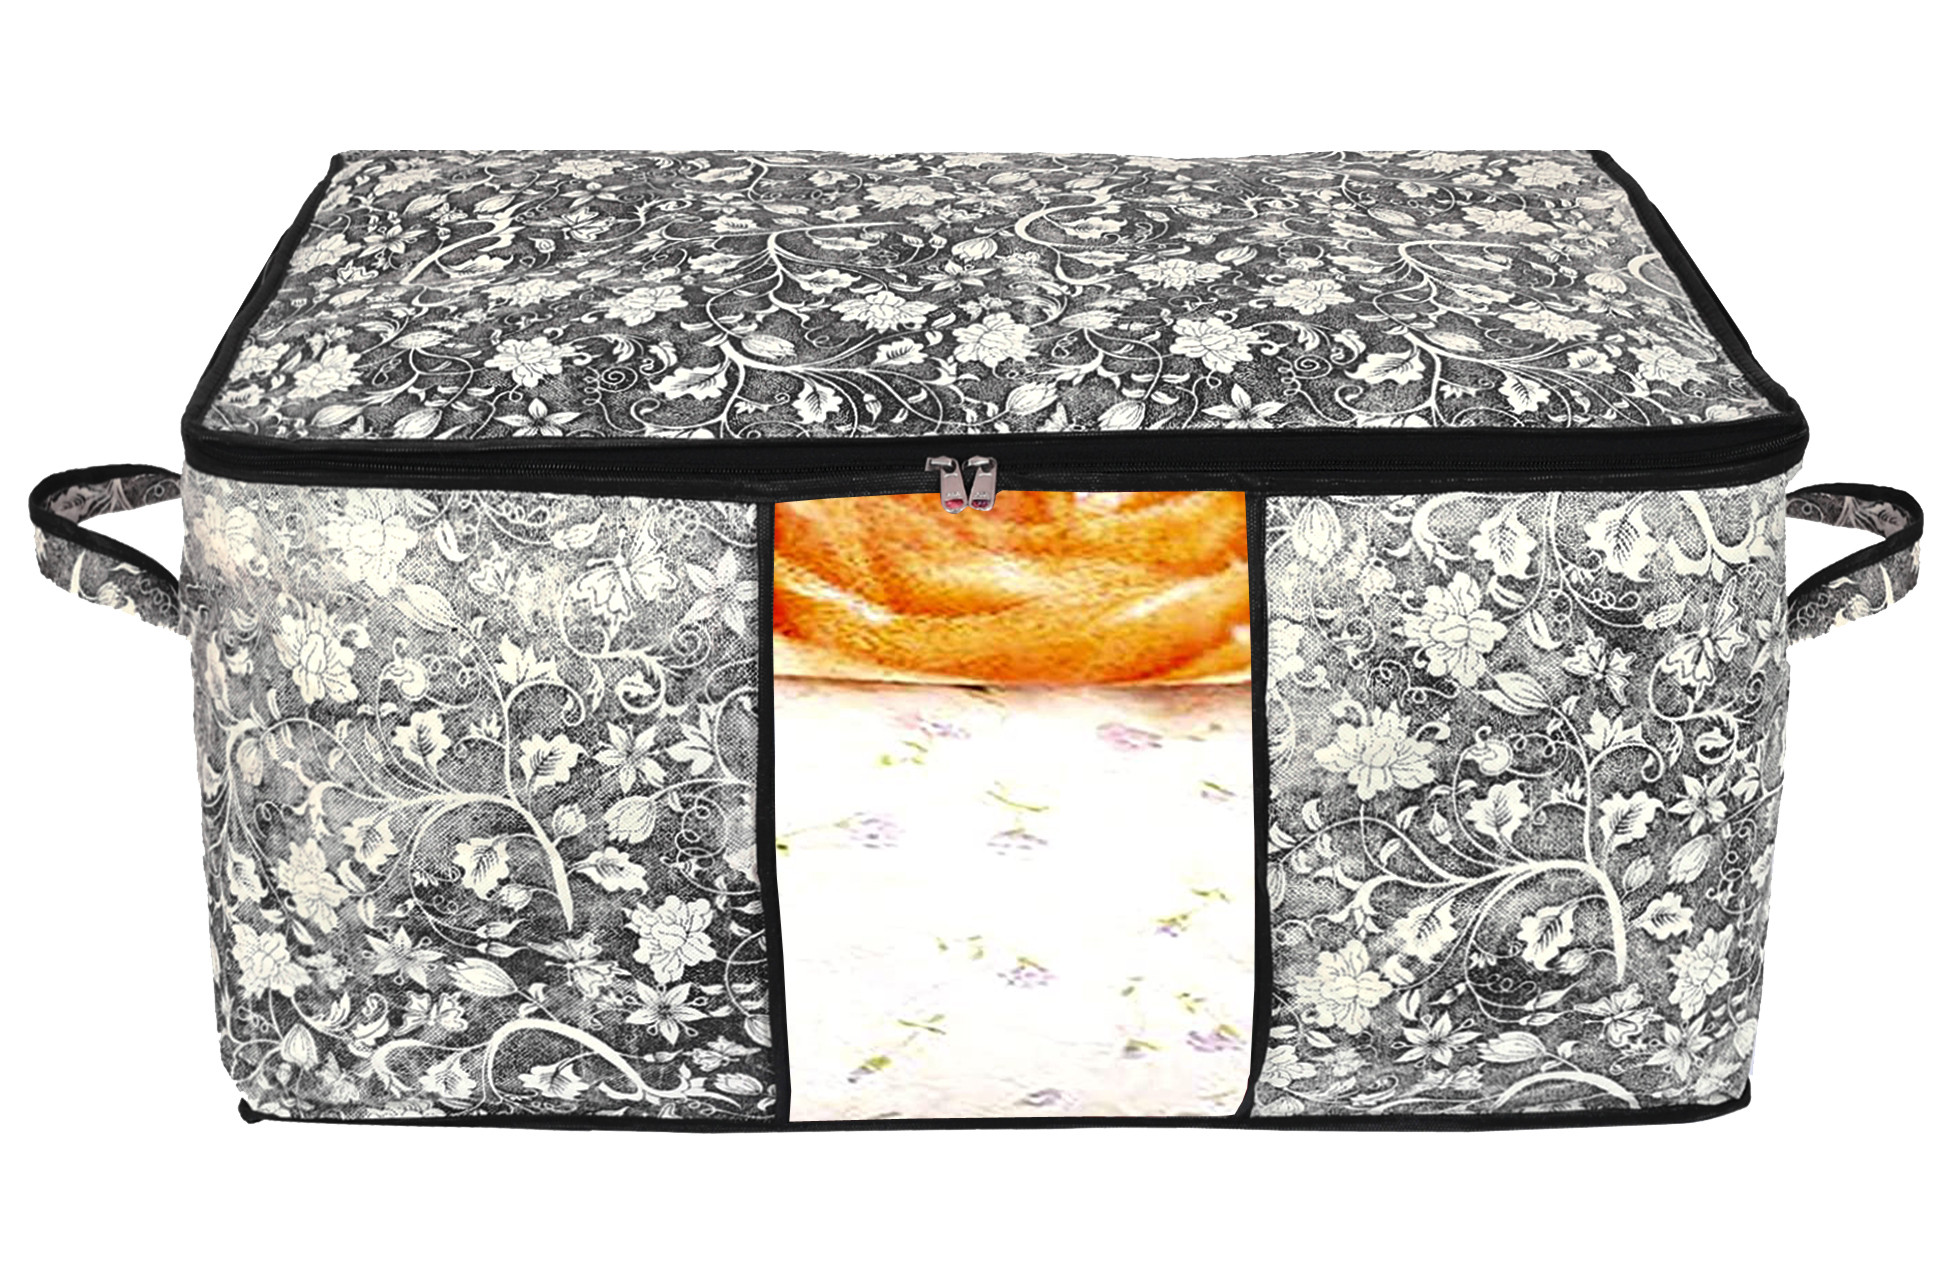 Kuber Industries Metalic Leafy,Flower Print Non Woven Underbed Storage Bag,Cloth Organiser,Blanket Cover with Transparent Window (Pink & Black)-34_S_KUBMART16633